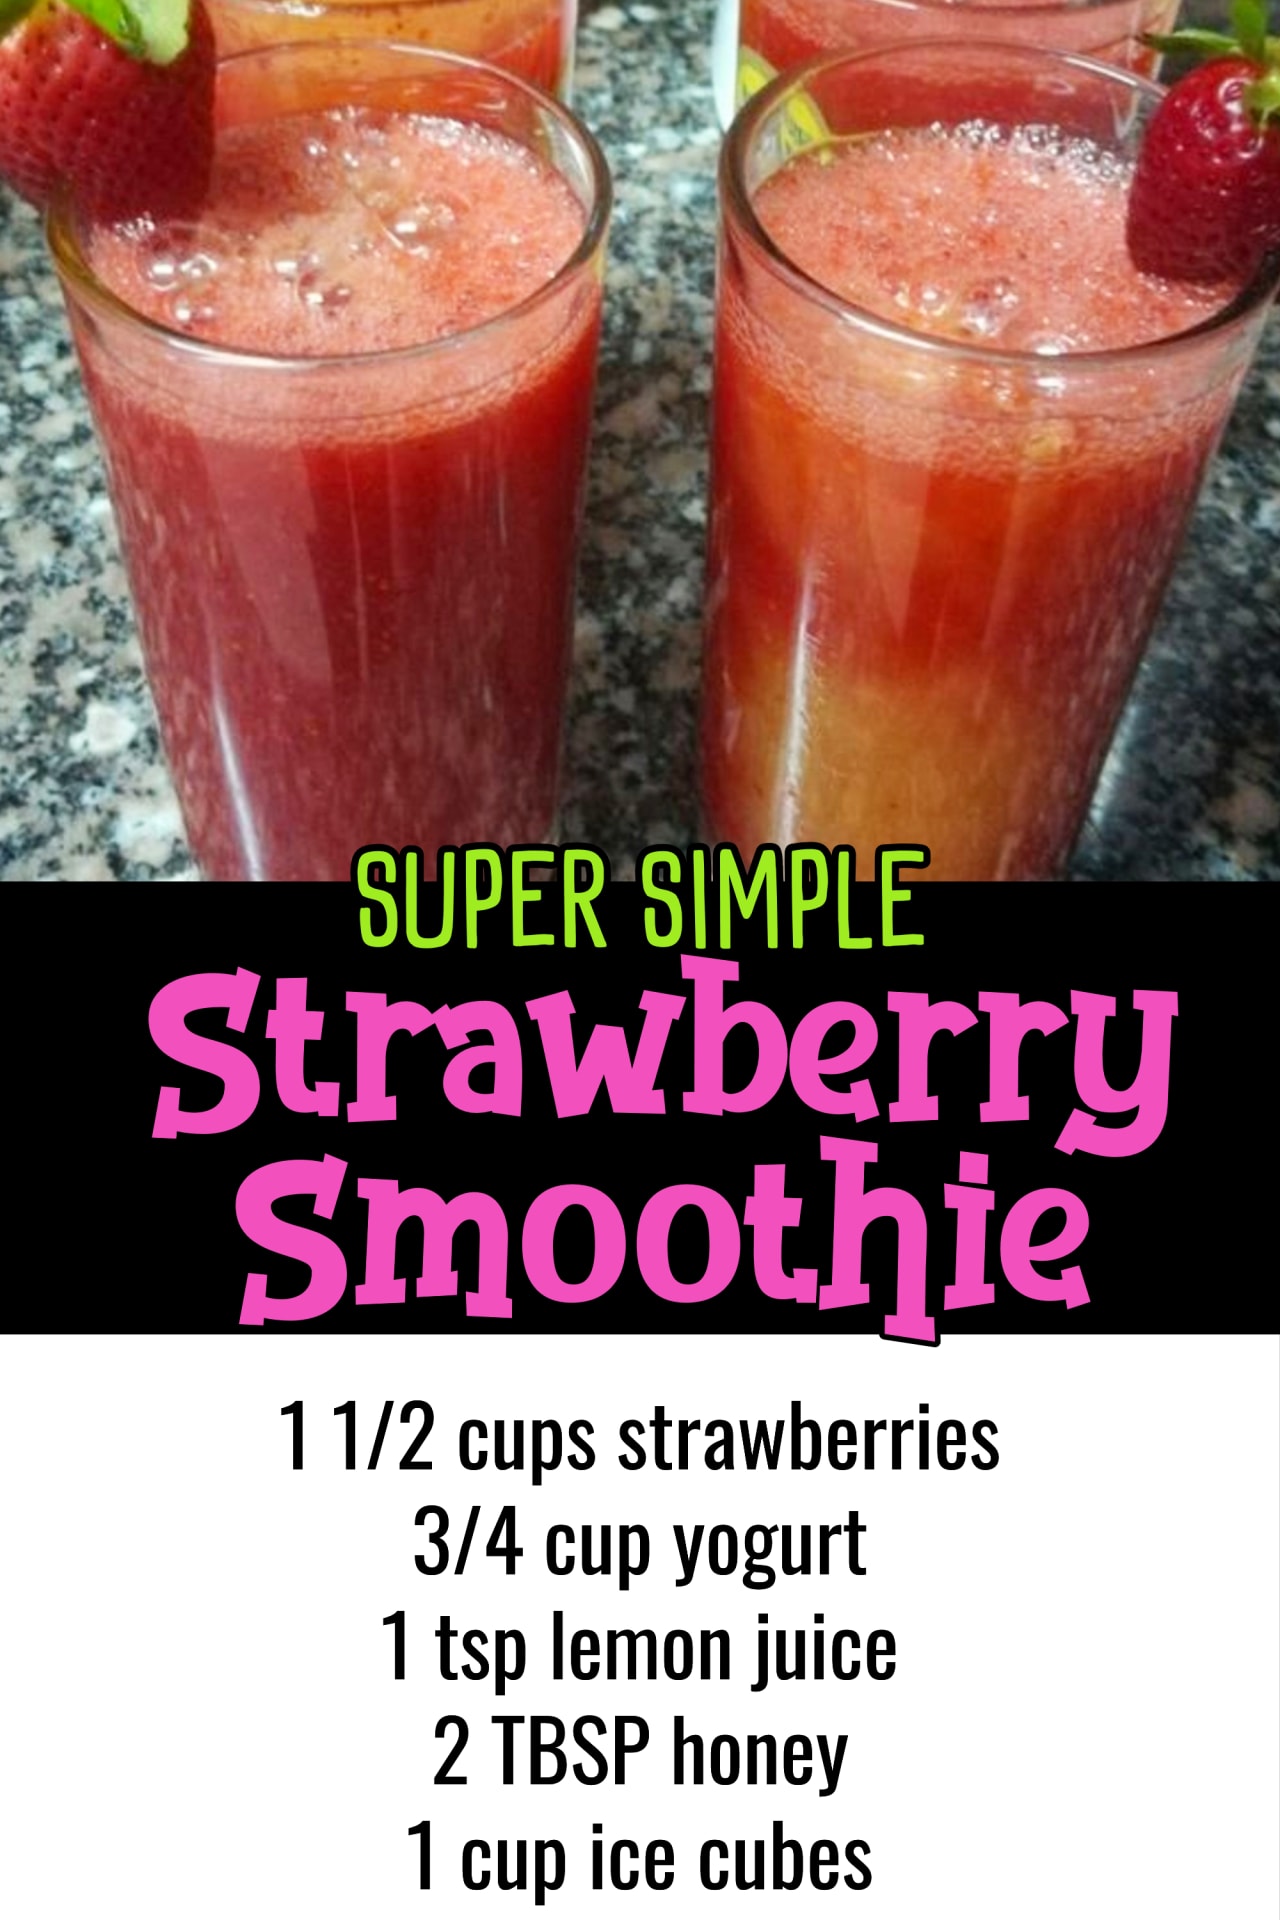 Easy strawberry smoothies recipes - healthy smoothie recipes for breakfast